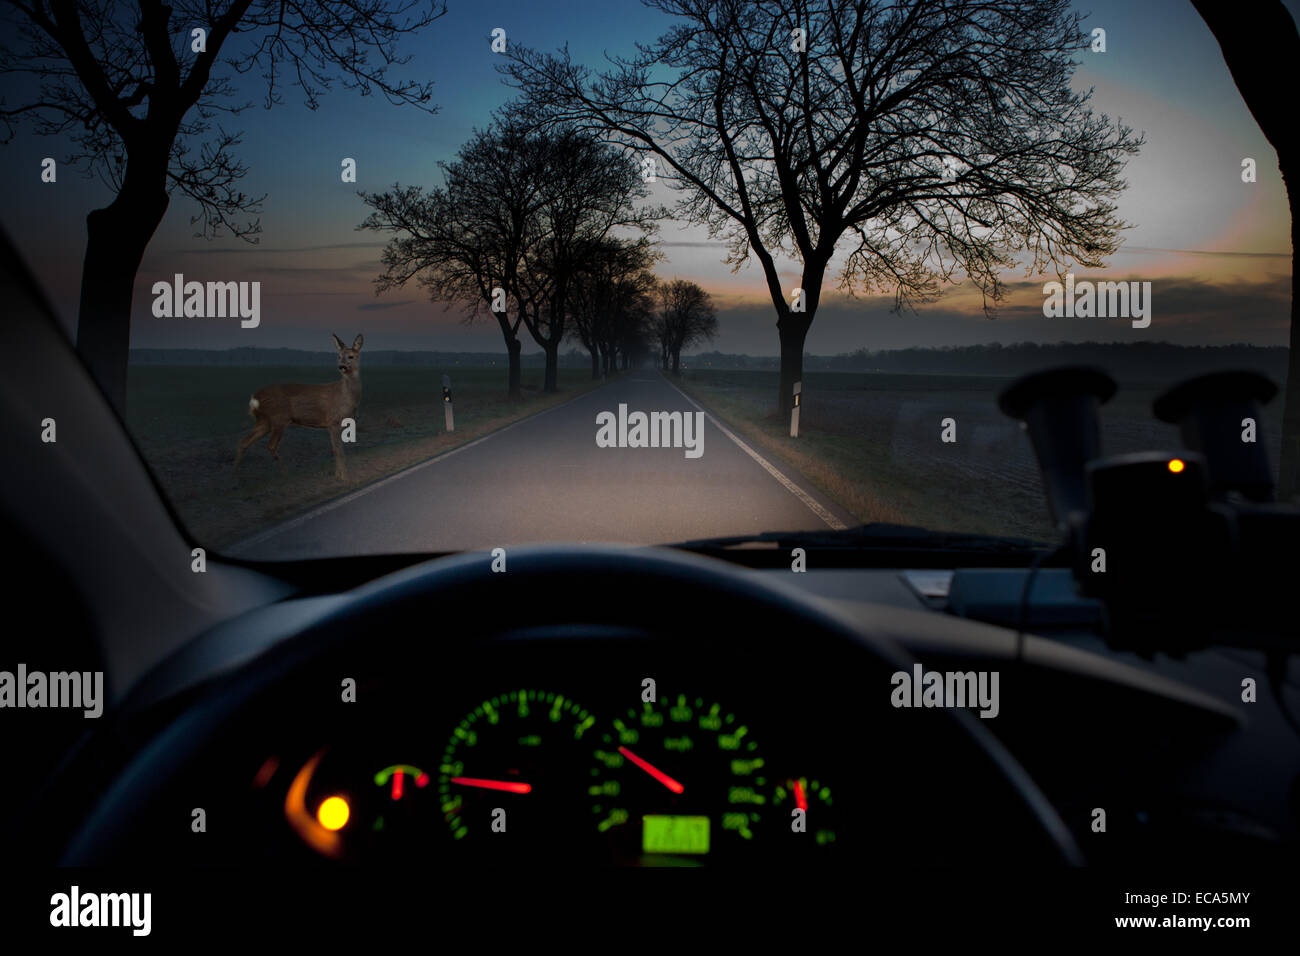 Deer standing in the twilight on the roadside in the headlights of a car, viewed by the driver Stock Photo